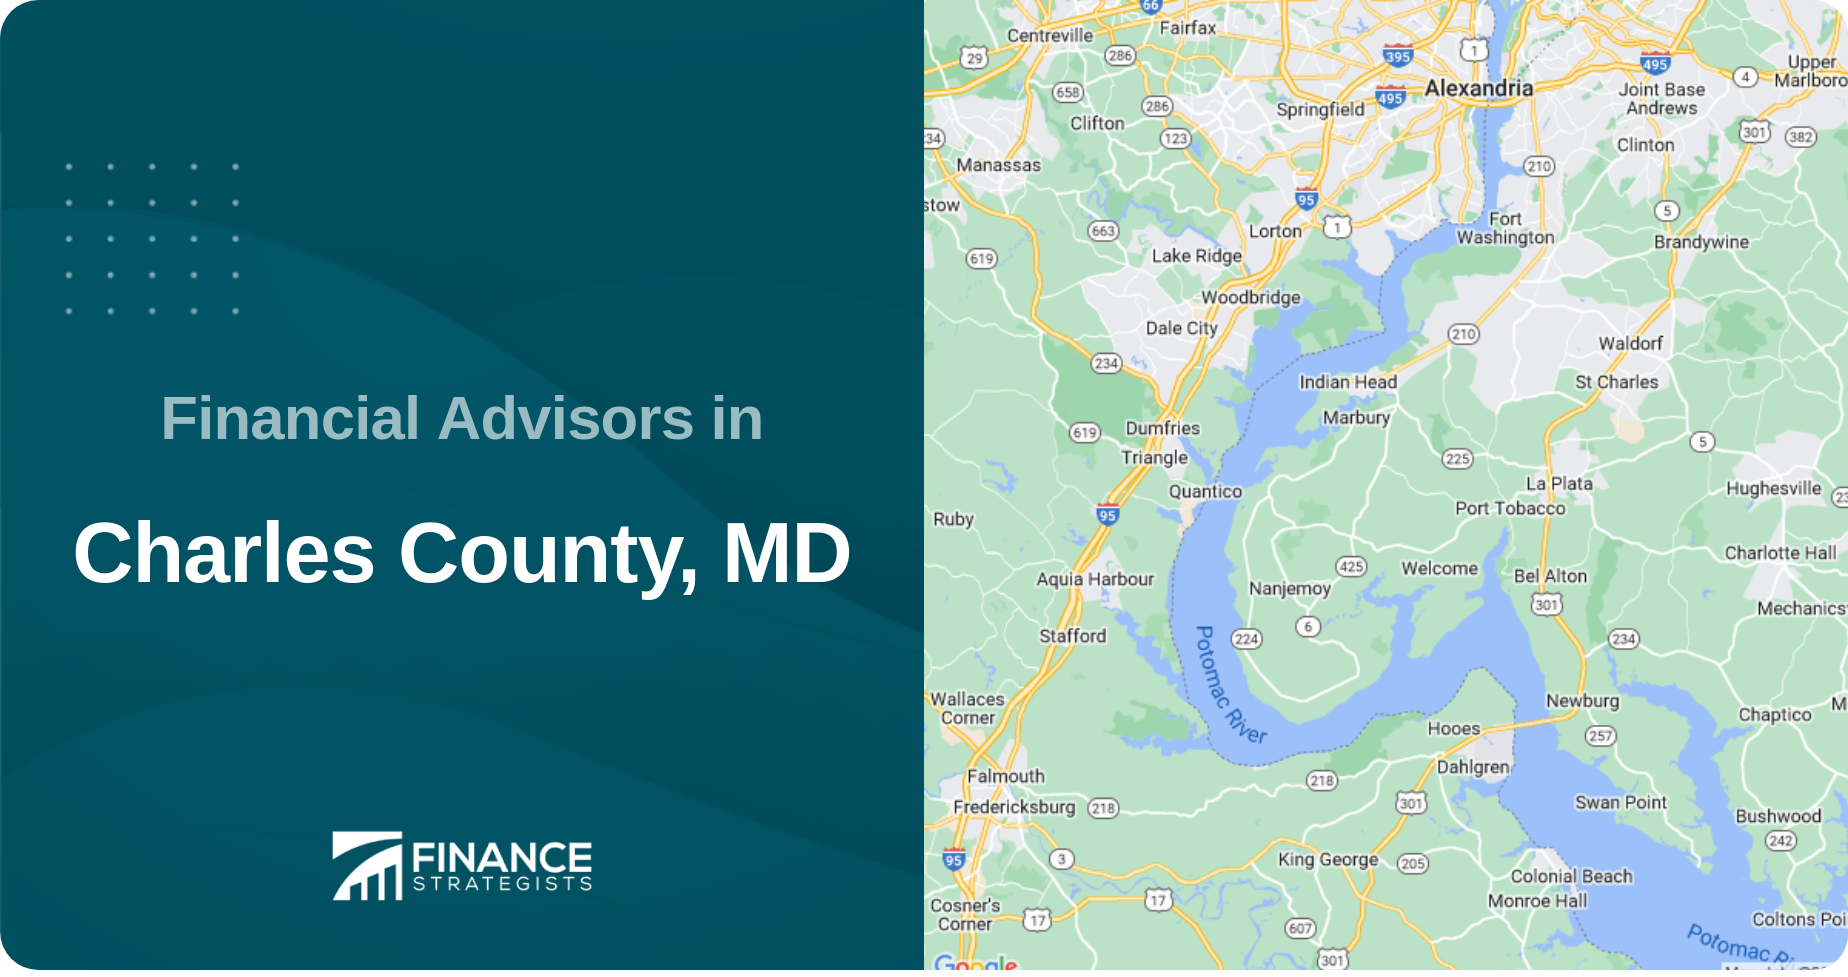 Financial Advisors in Charles County, MD